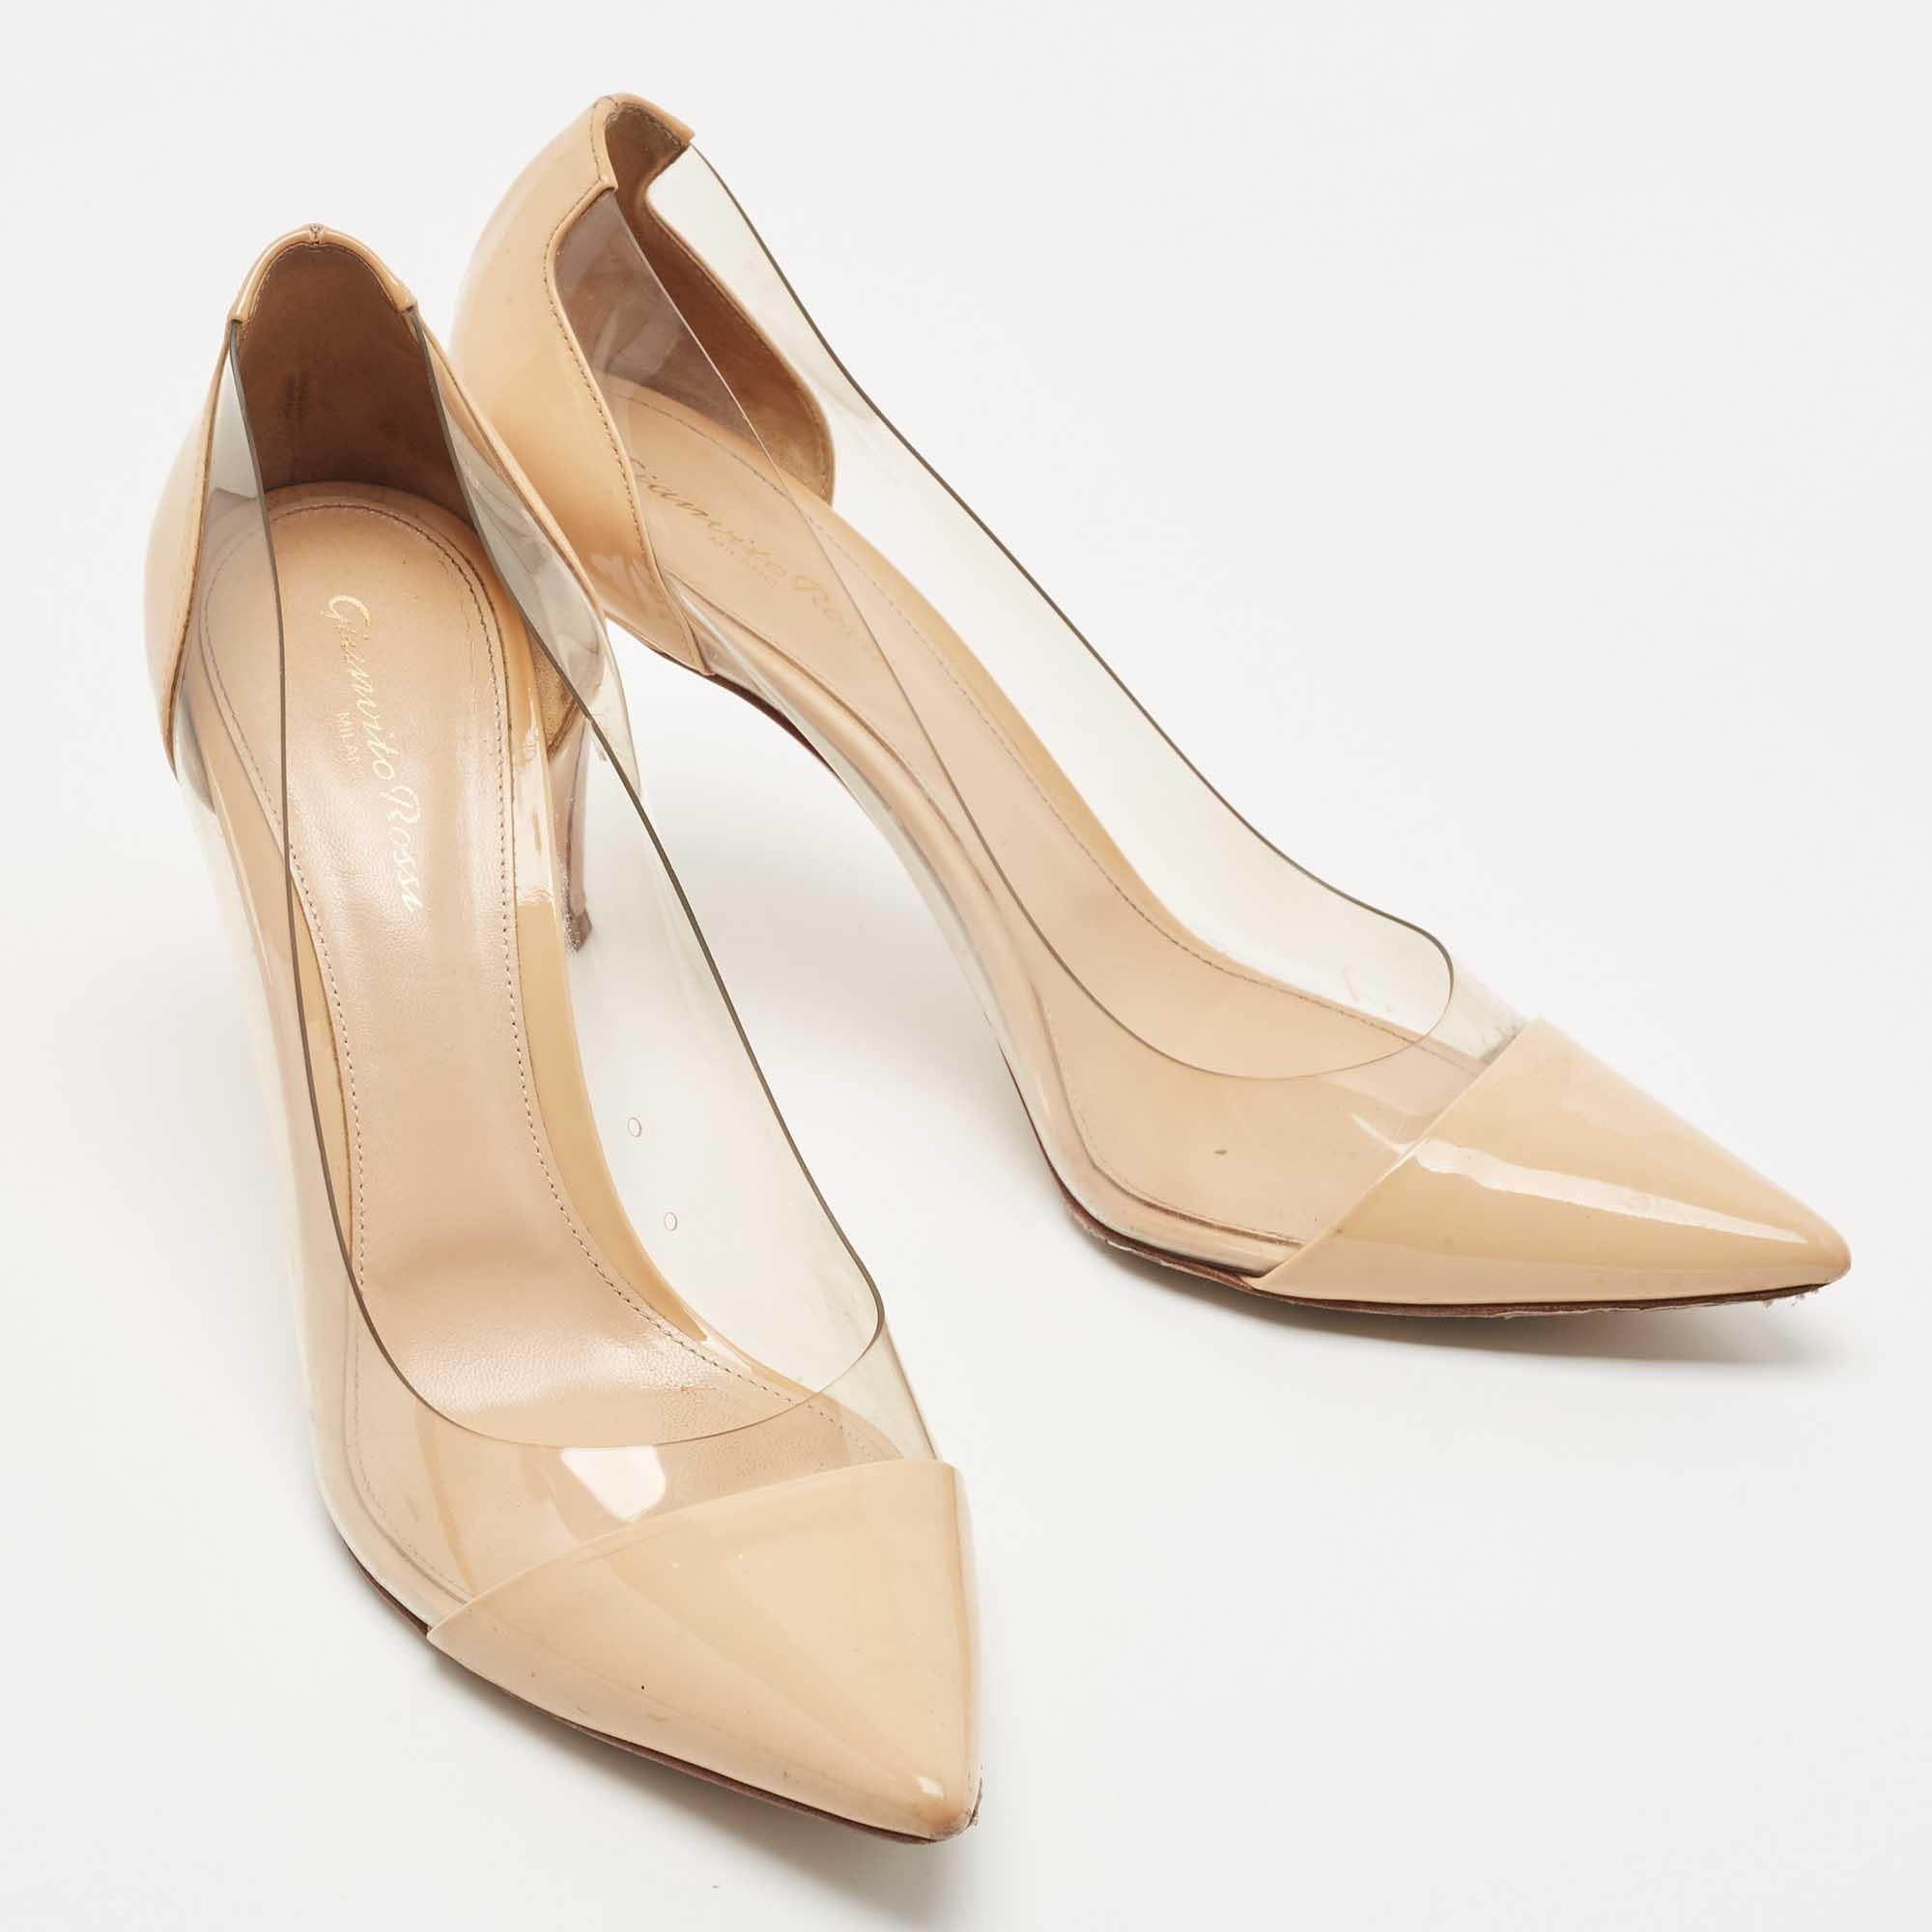 Gianvito Rossi's timeless aesthetic and stellar craftsmanship in shoemaking is evident in these stunning Plexi pumps. Crafted from beige patent leather on the pointed toes and heel counters, they are adorned with transparent PVC for a minimal